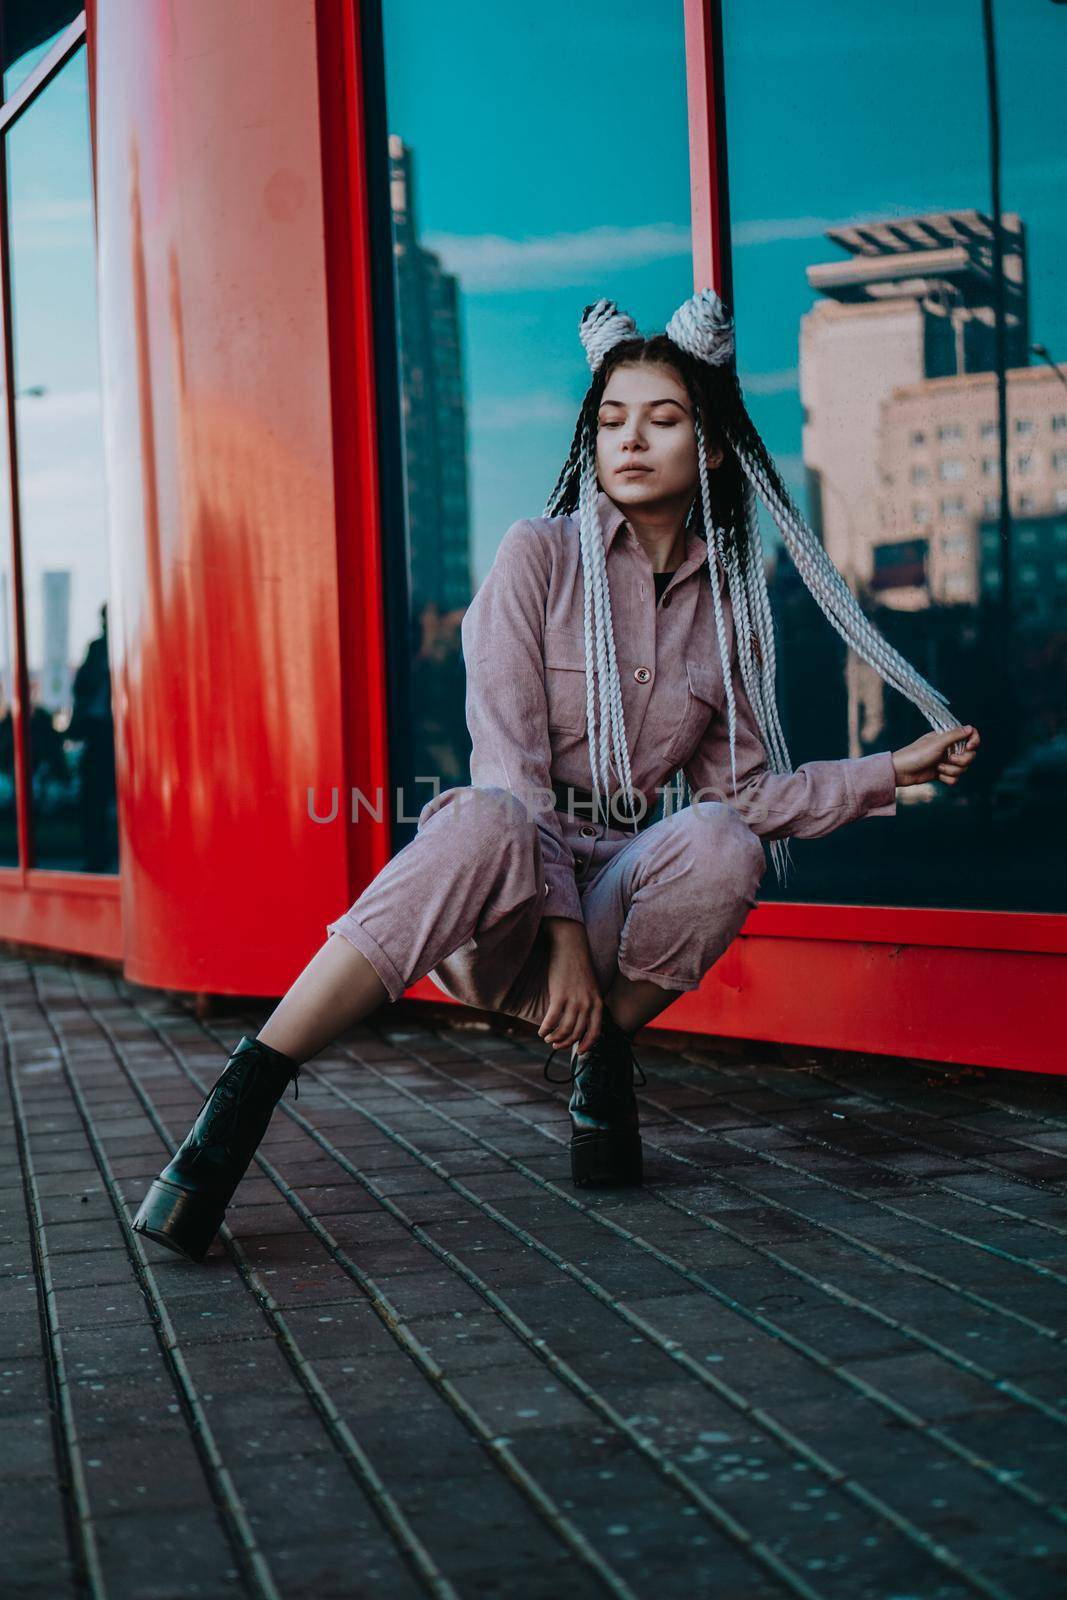 Beautiful cool girl with dreadlocks Photo in the city - urban style